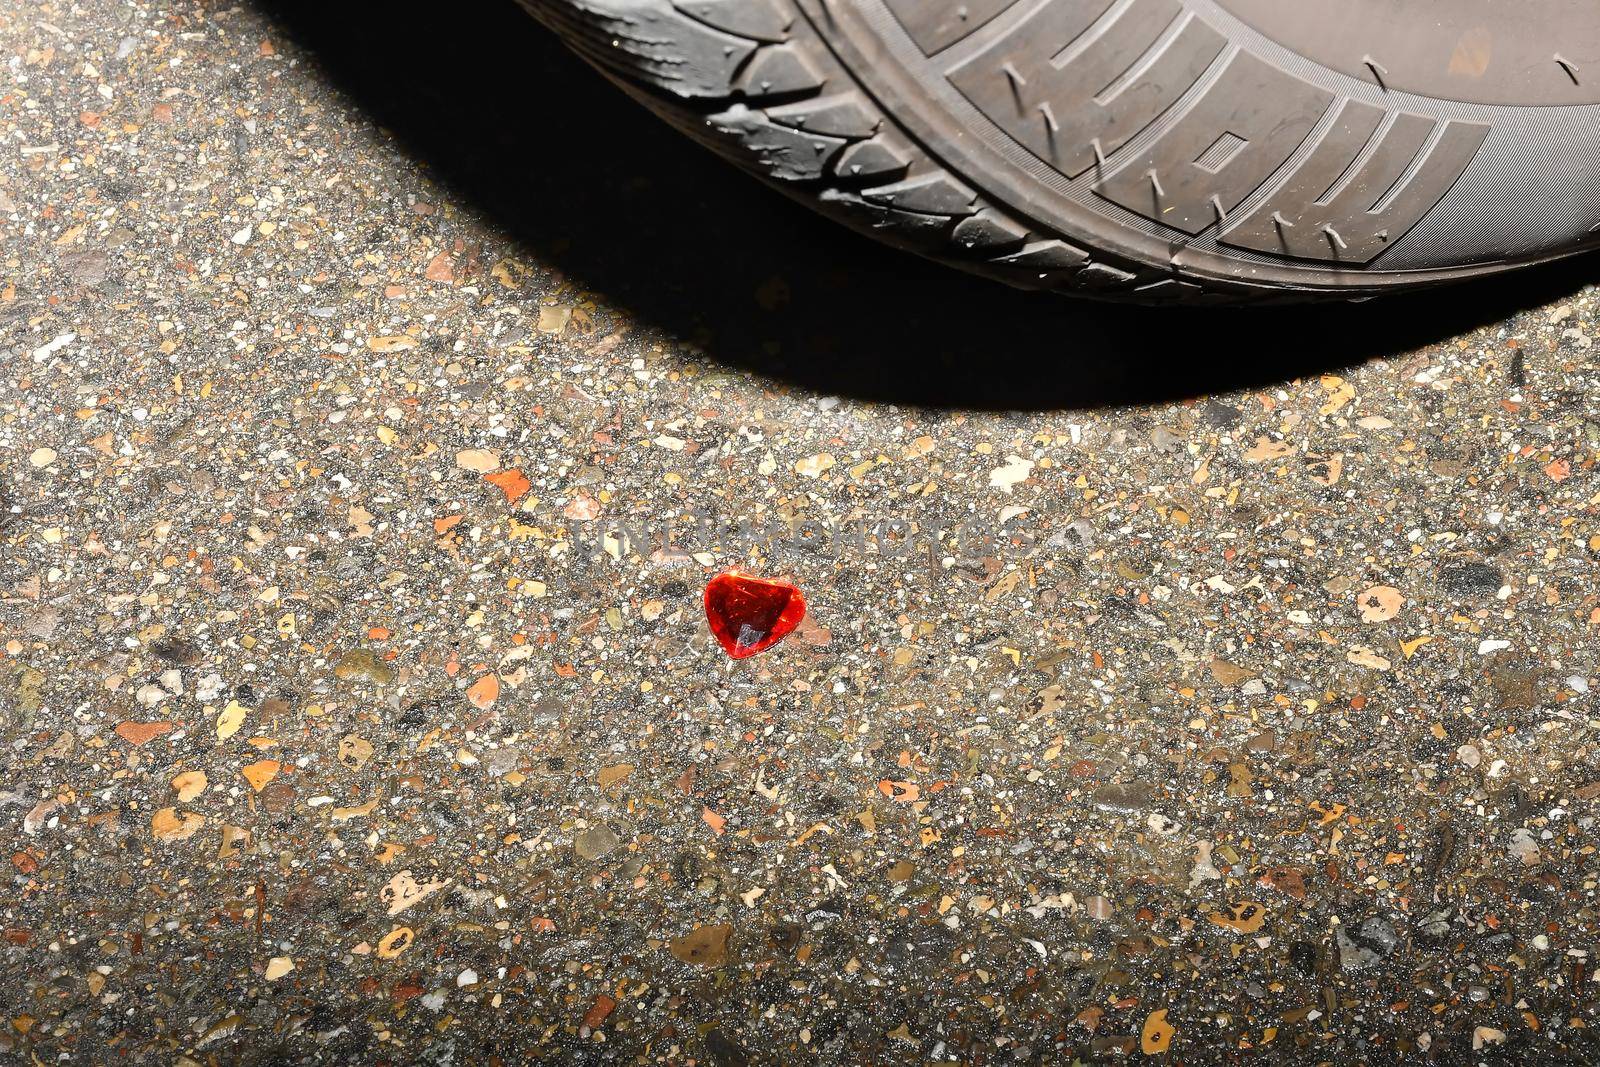 Heart on a road in front of a car wheel